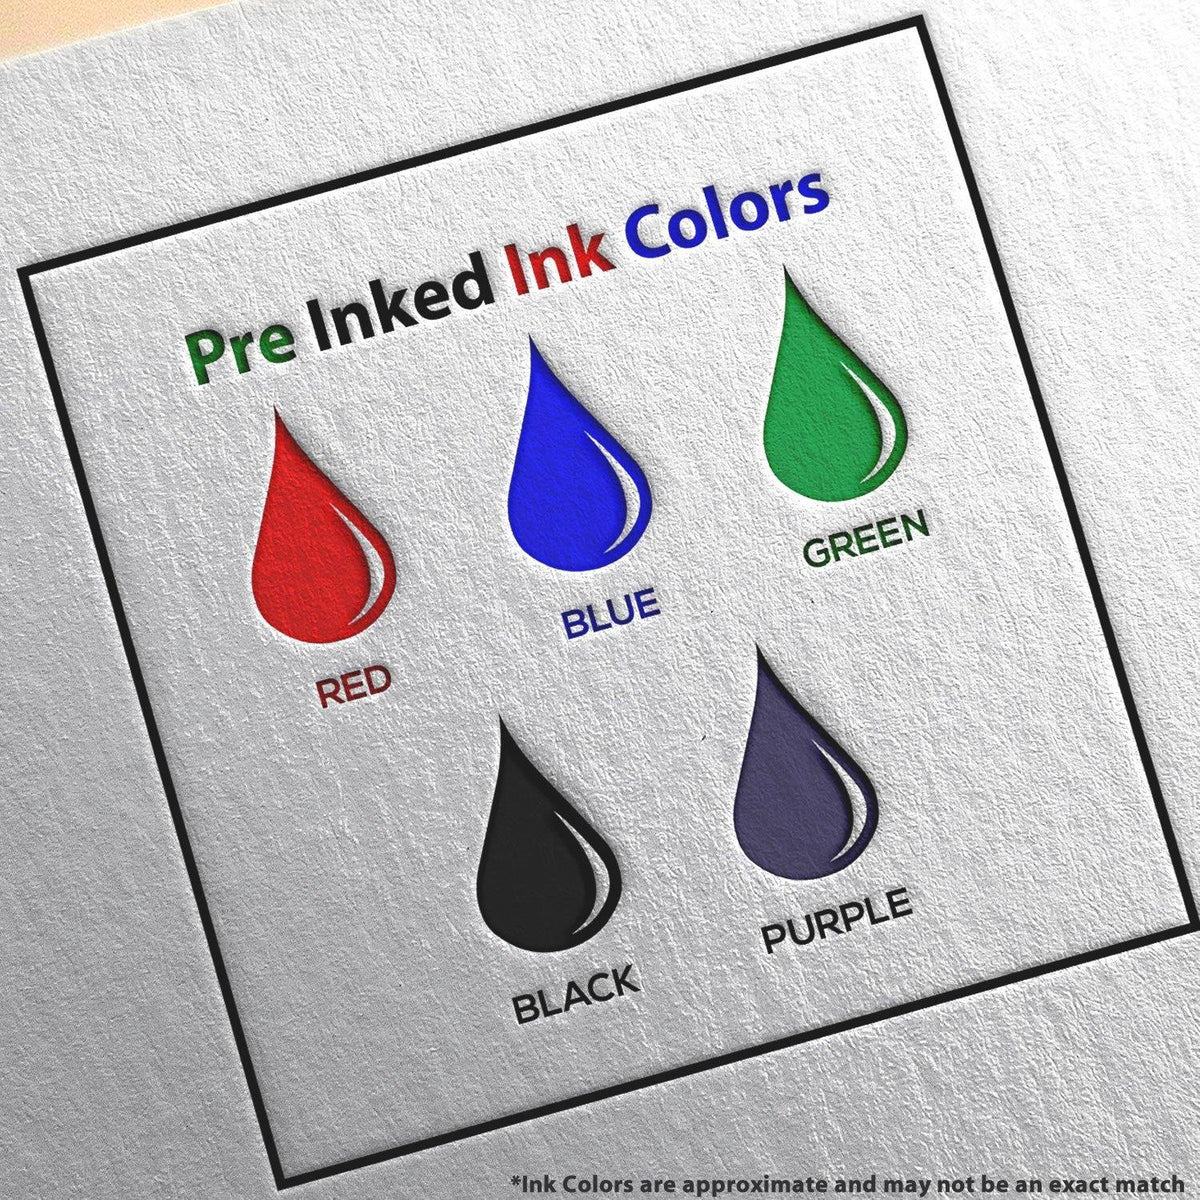 Slim Pre-Inked For Deposit Only with Line Stamp Ink Color Options